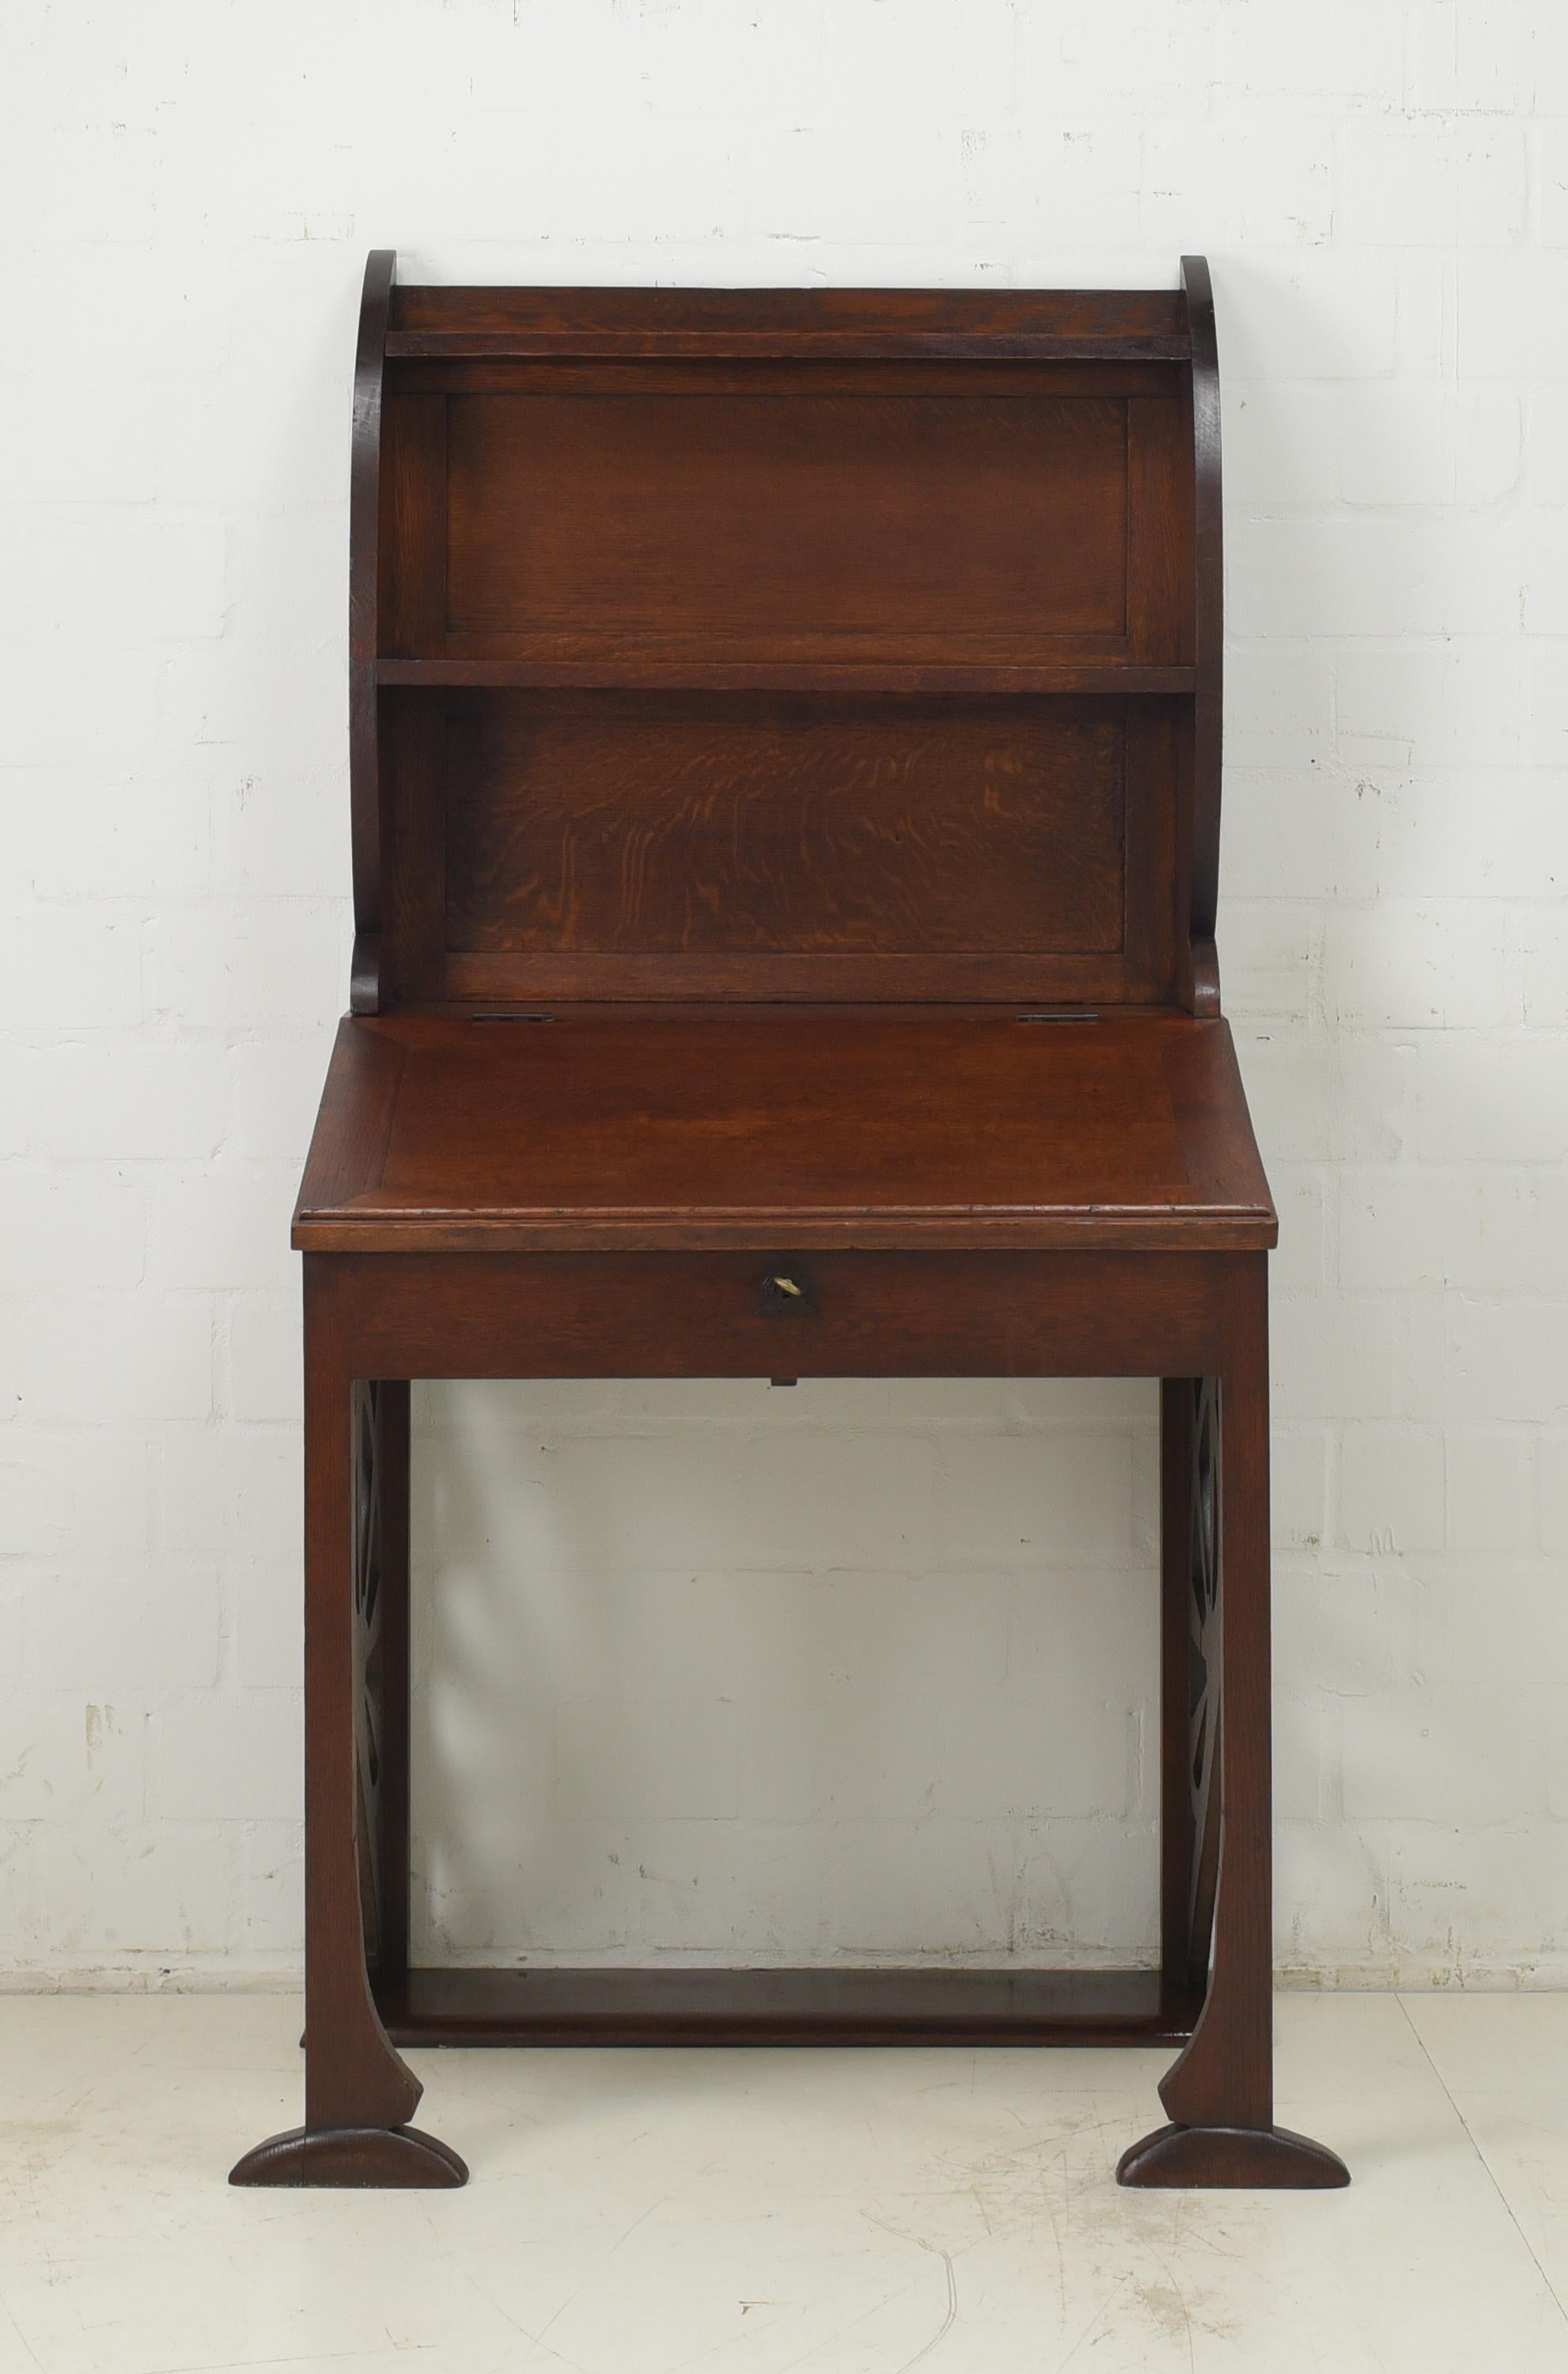 Art Nouveau writing desk with shelf top in Oak, 1910

Features:
High quality
With a foldable writing surface
Very unusual Art Nouveau design
Original keyhole fitting
Very rare model

Additional information:
Material: Completely solid